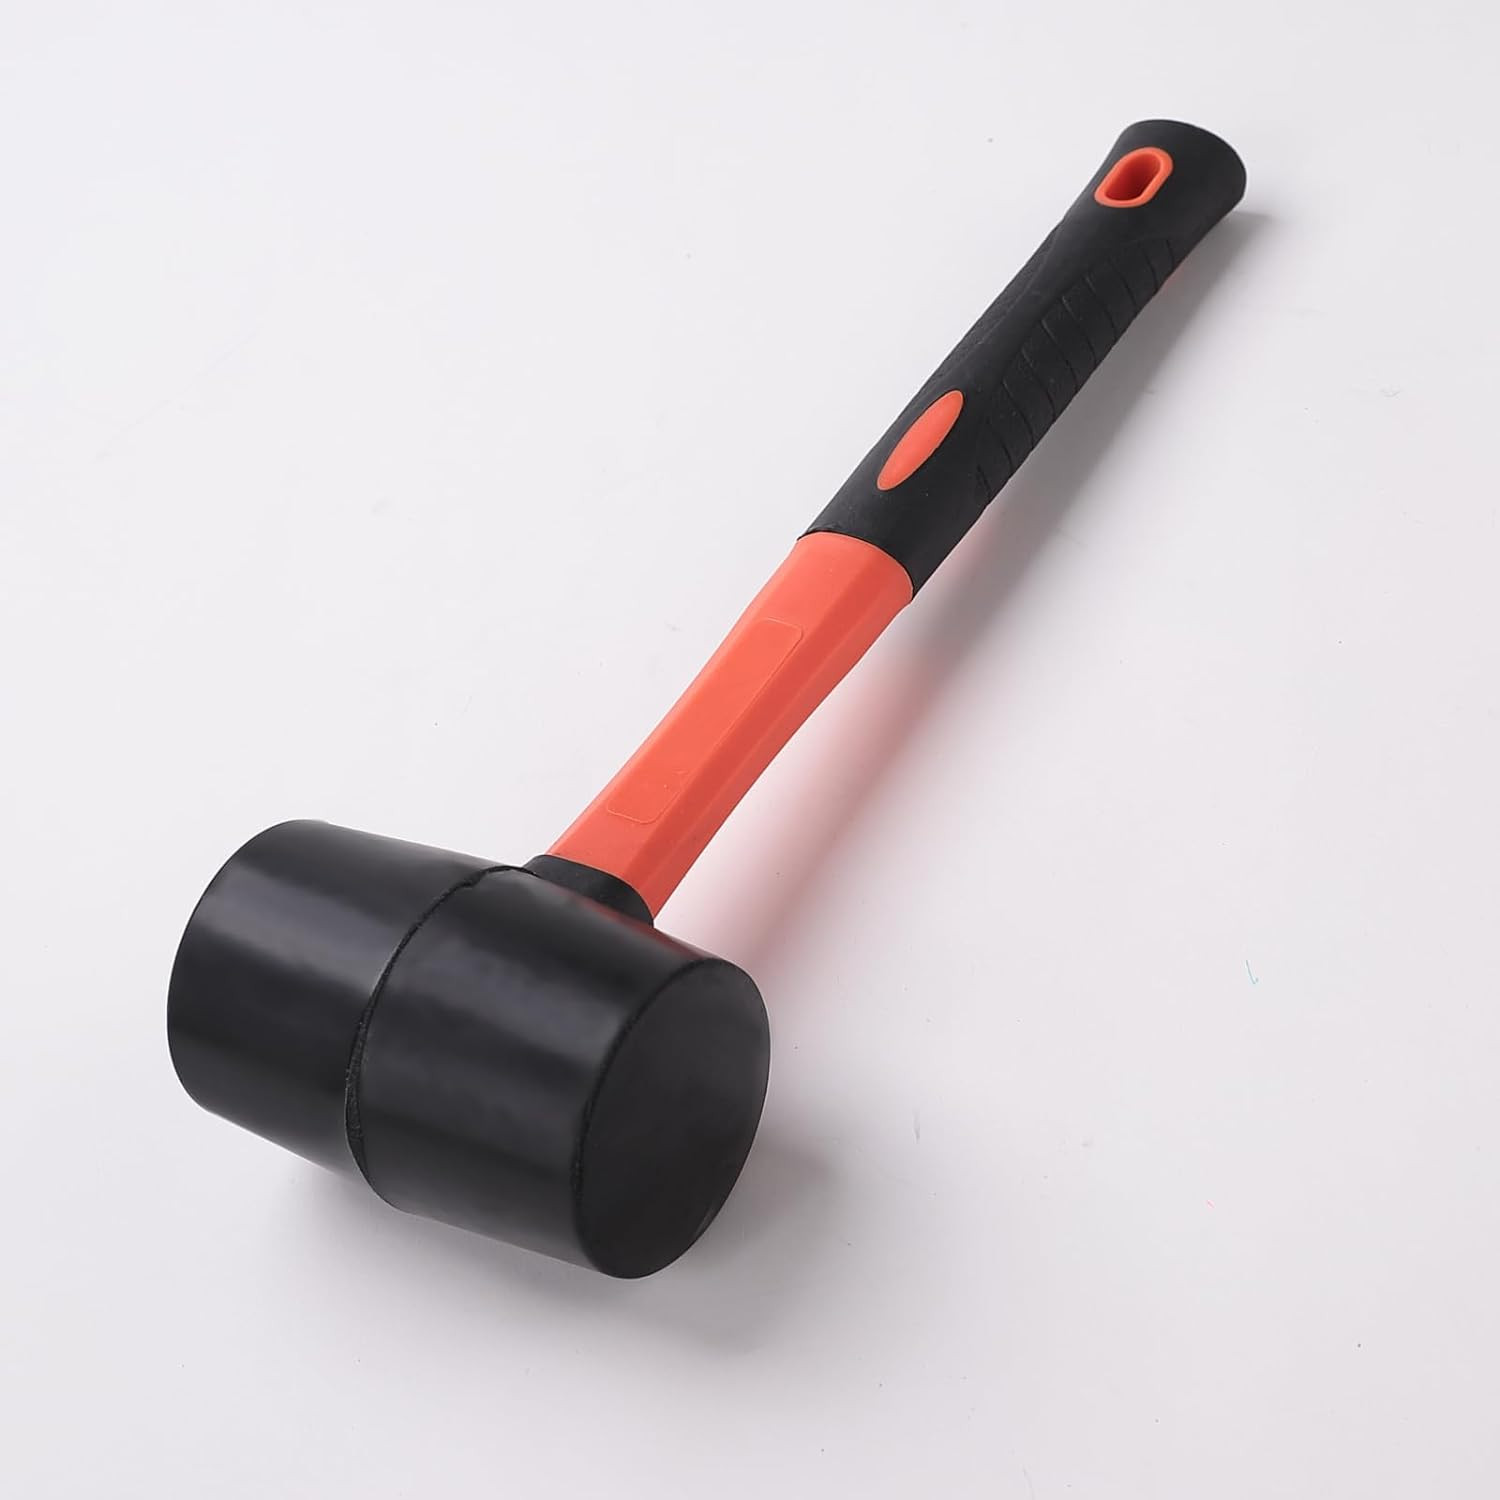 Kuber Industries Rubber Mallet|Non-Slip Small Hammer For Tiles|Soft Impact & No Damage (Red & Black)